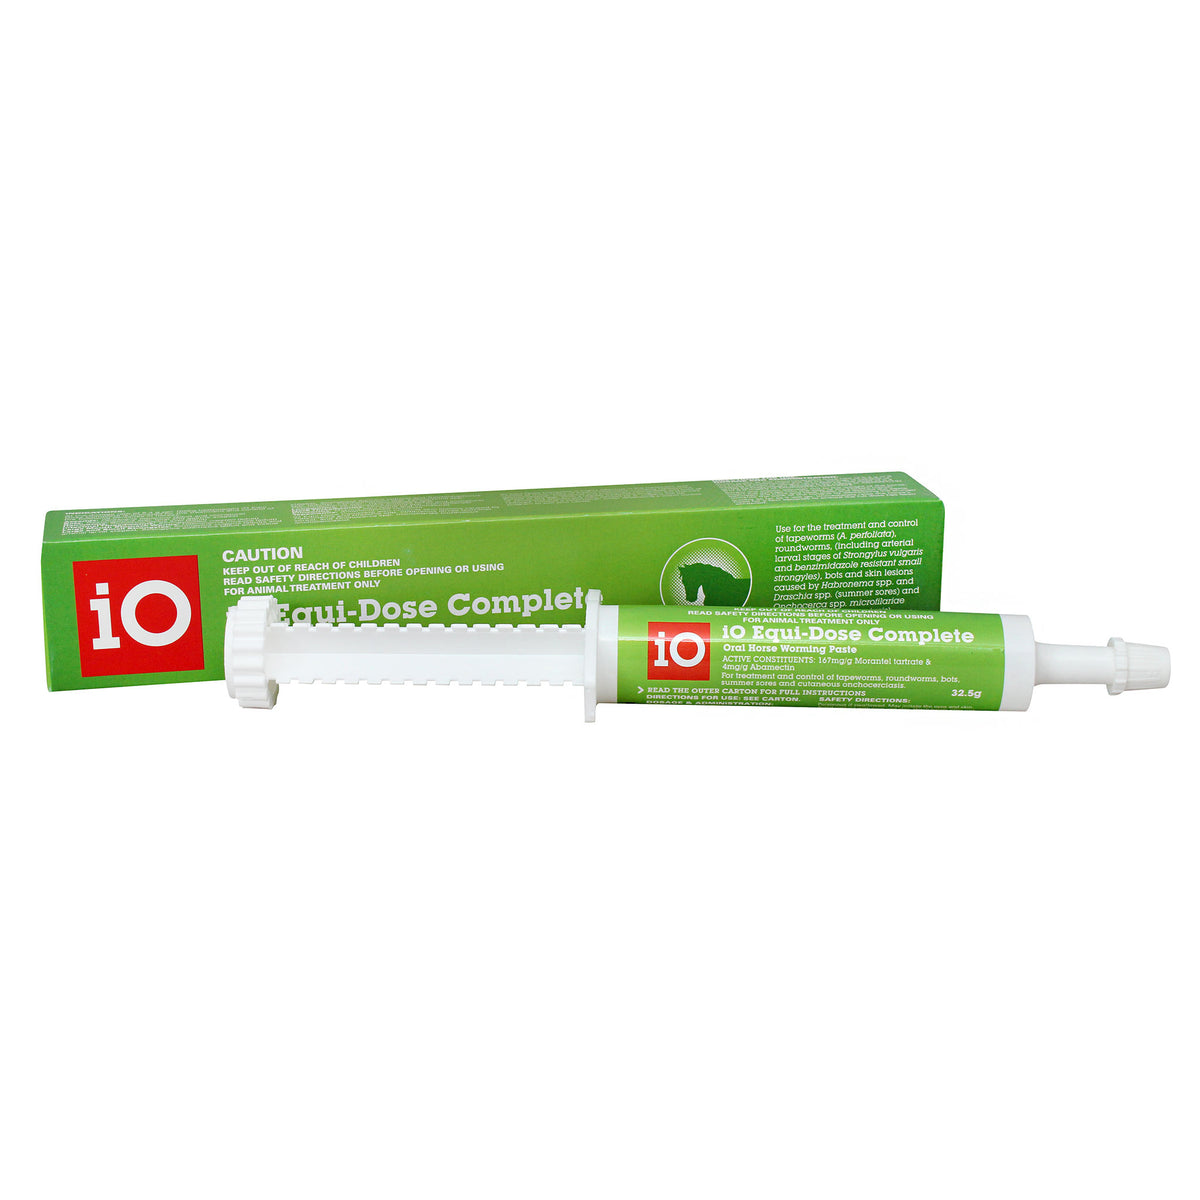 iO Equi-Dose Complete Horse Wormer Paste - Green Tube